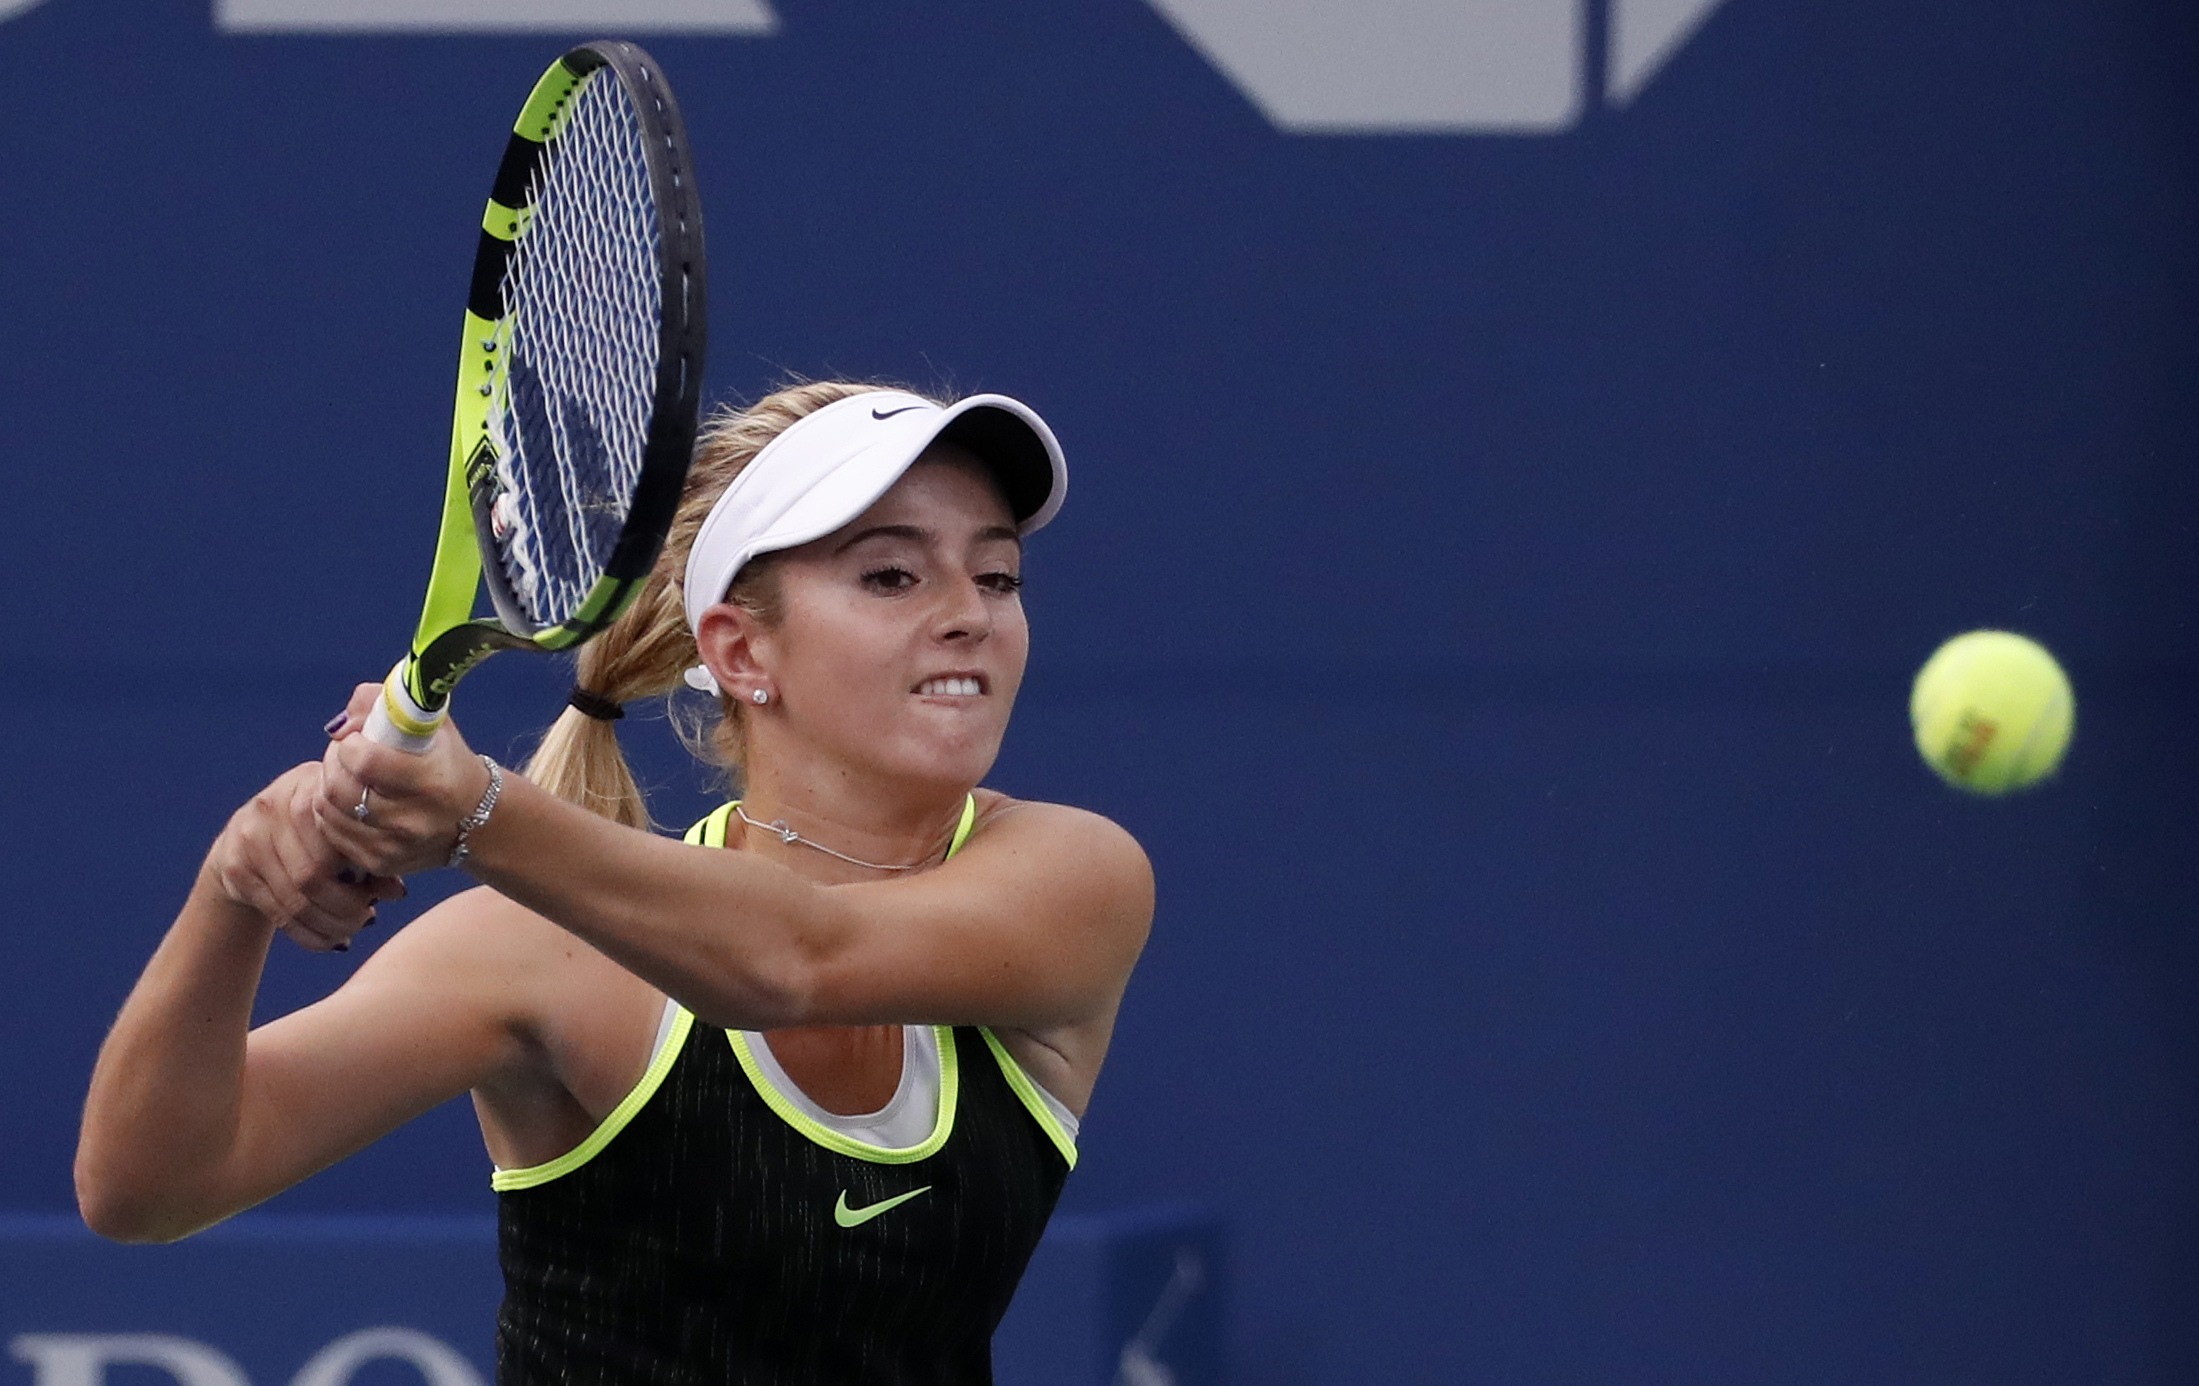 CiCi Bellis wins Hawaii Open, youngest player in WTA Top 100